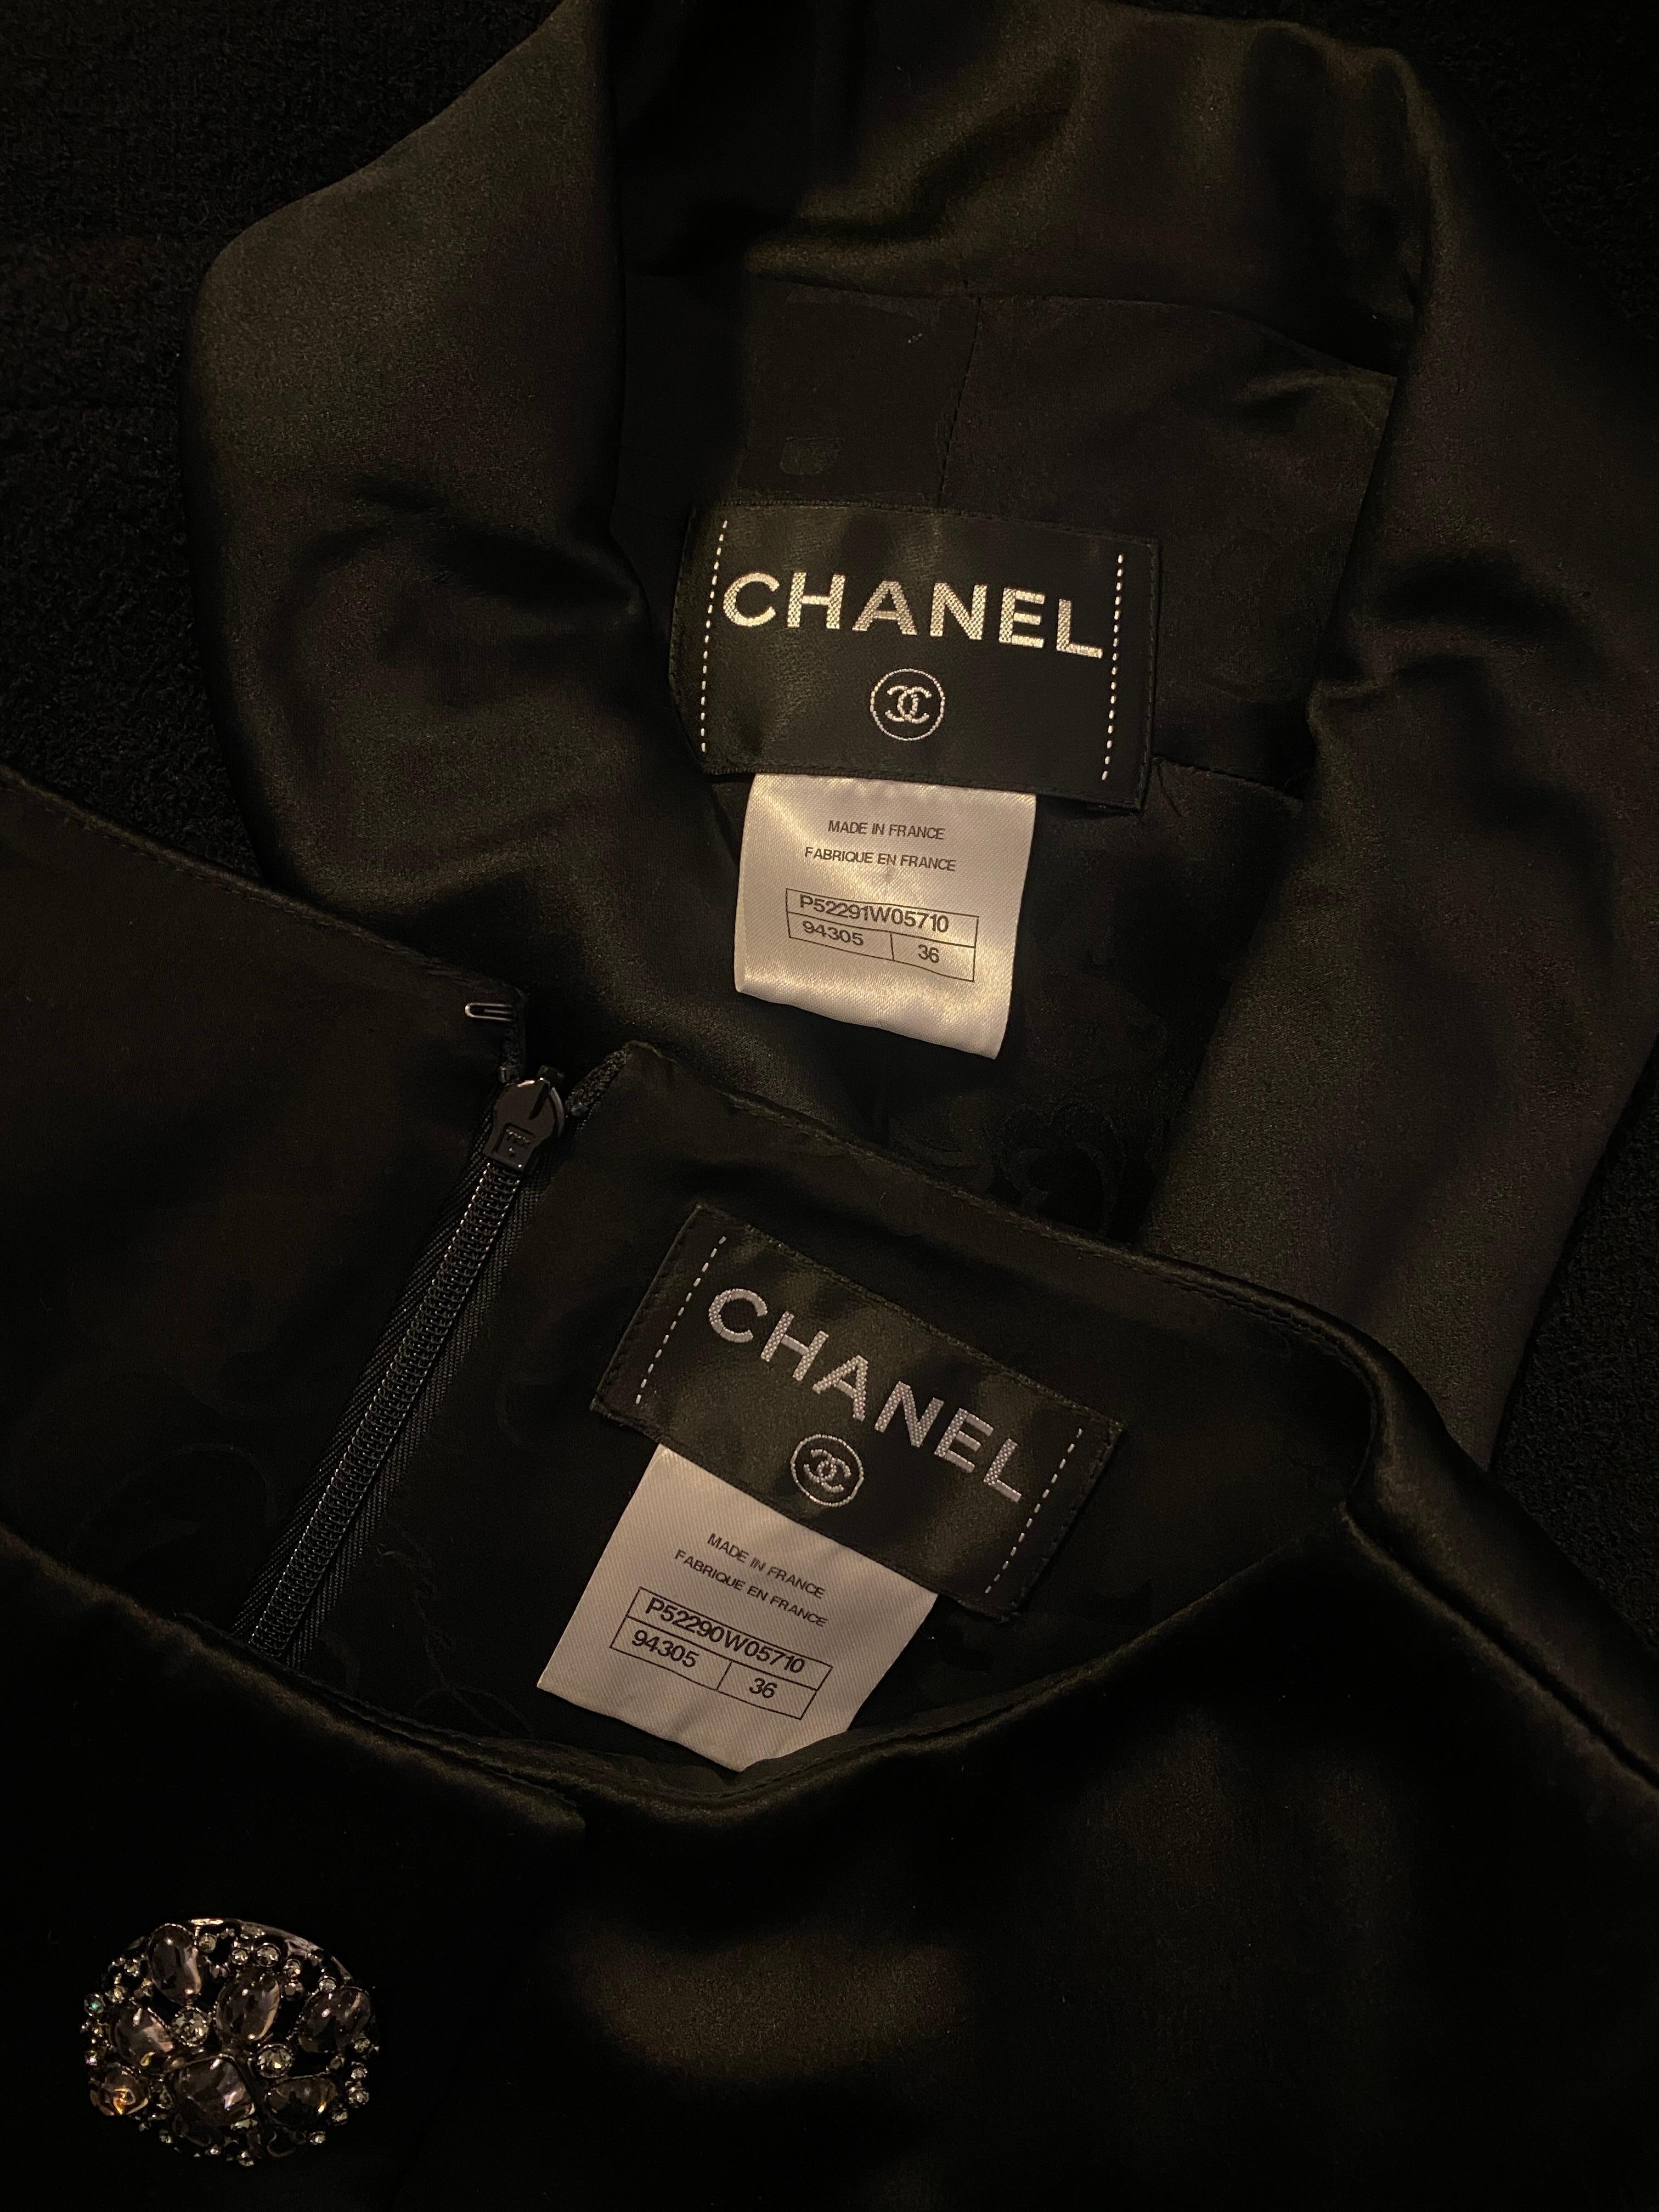 2015 Chanel Black Boucle Wool and Gripoix Dress Suit For Sale 3